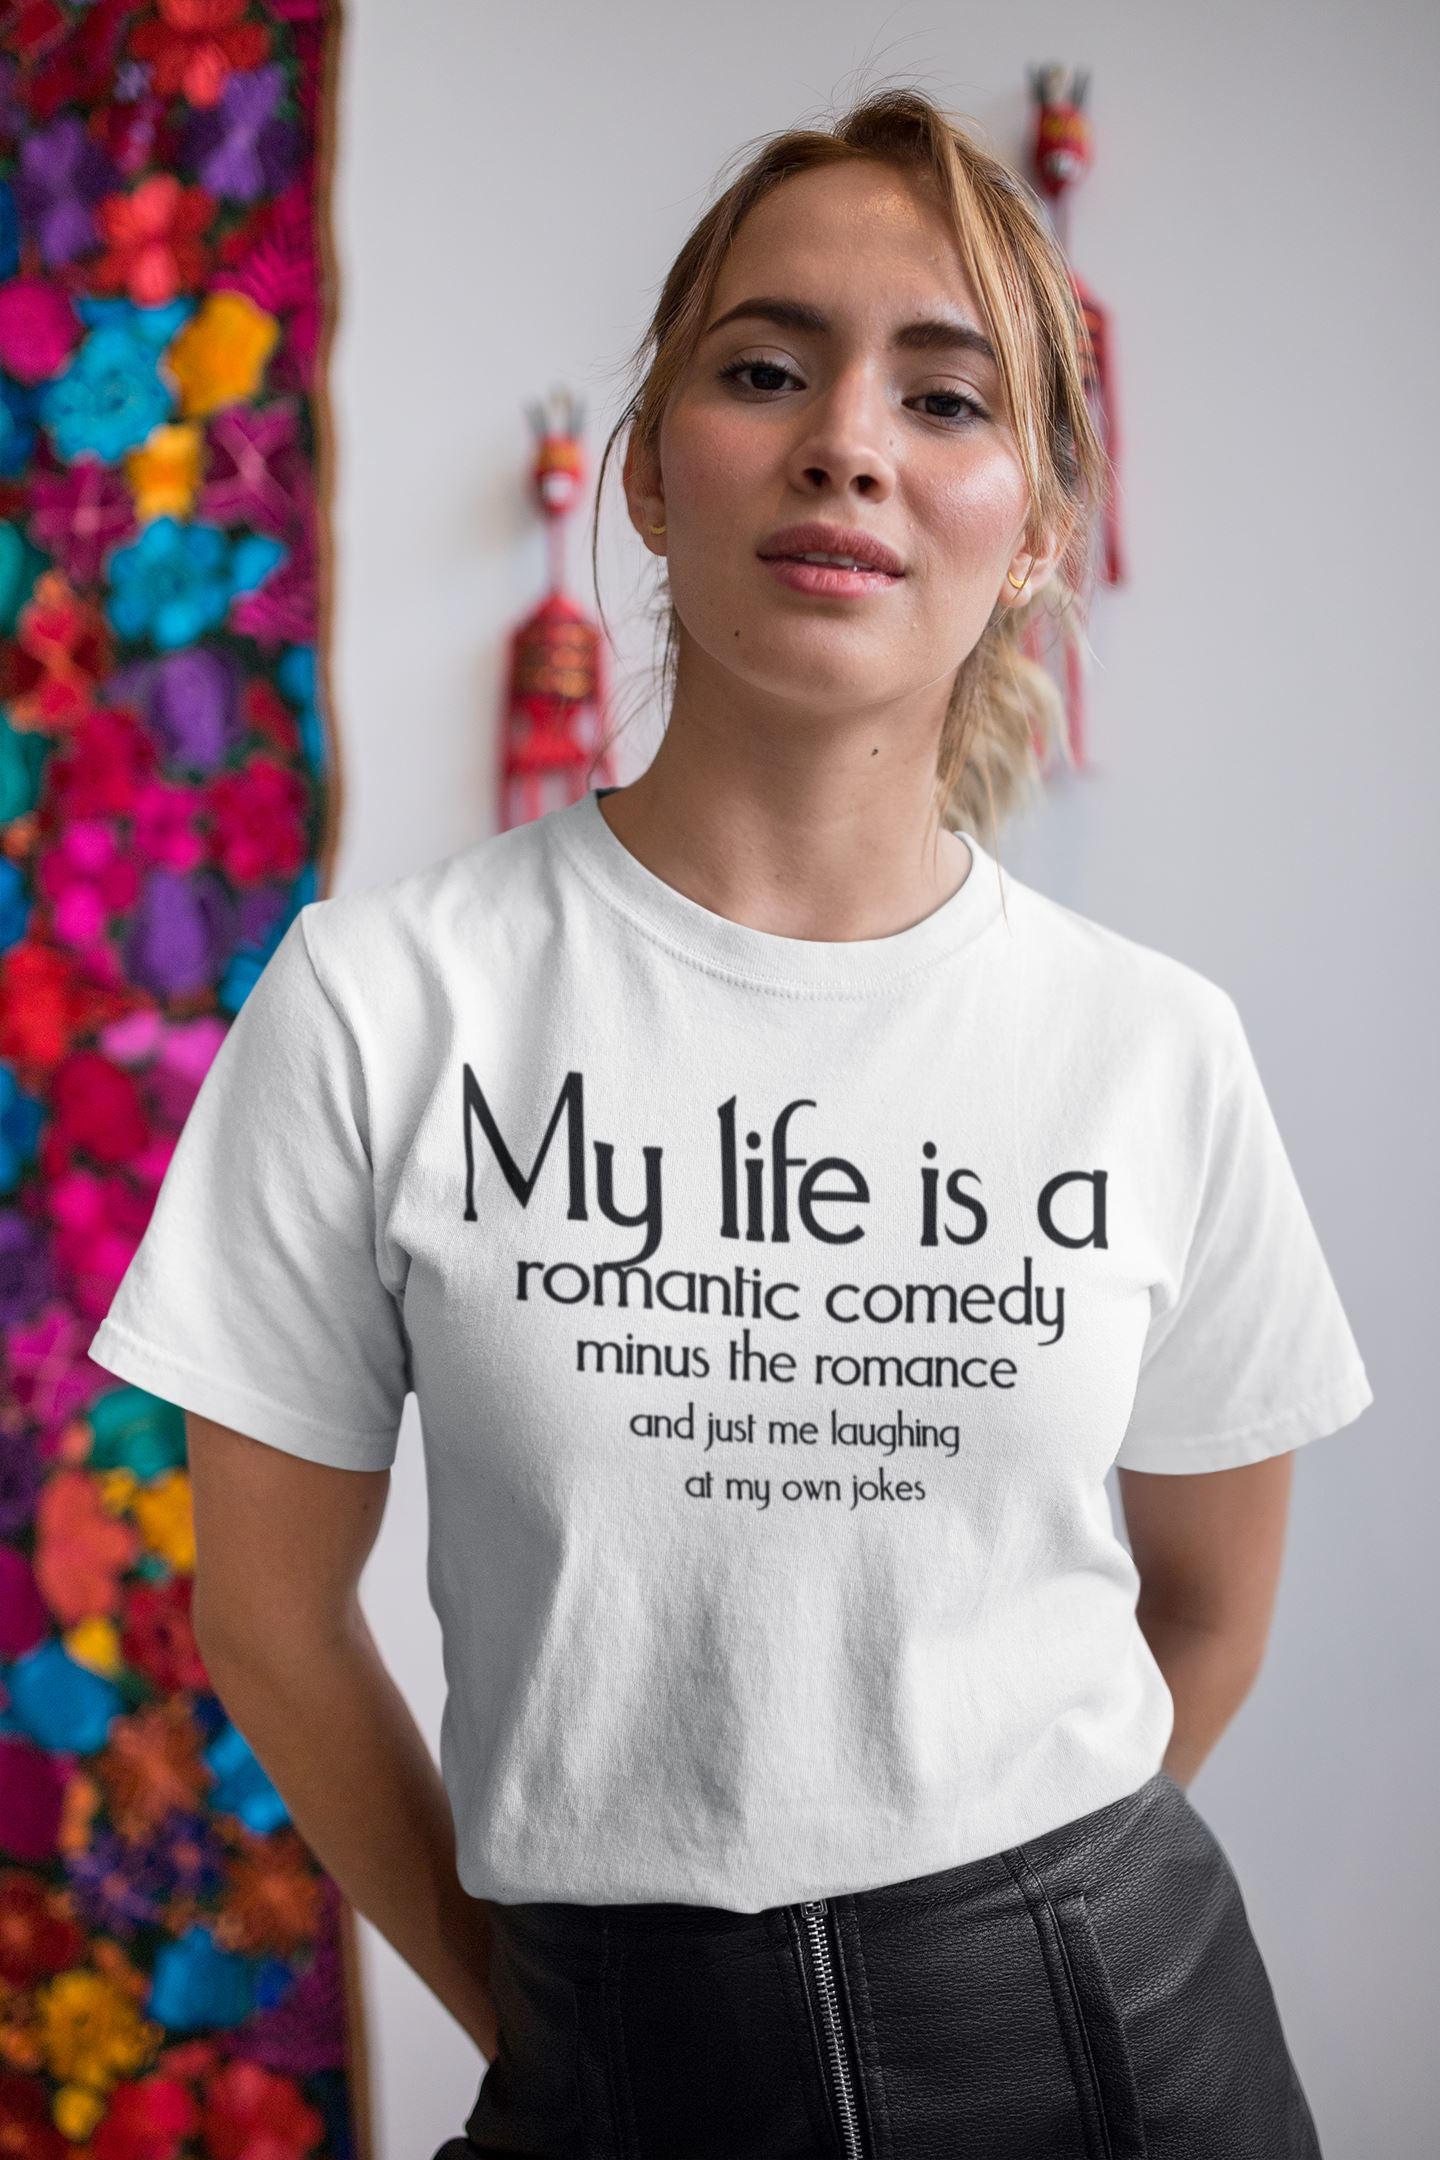 My Life is a Romantic Comedy Minus the Romance Funny White T Shirt for Women and Men freeshipping - Catch My Drift India